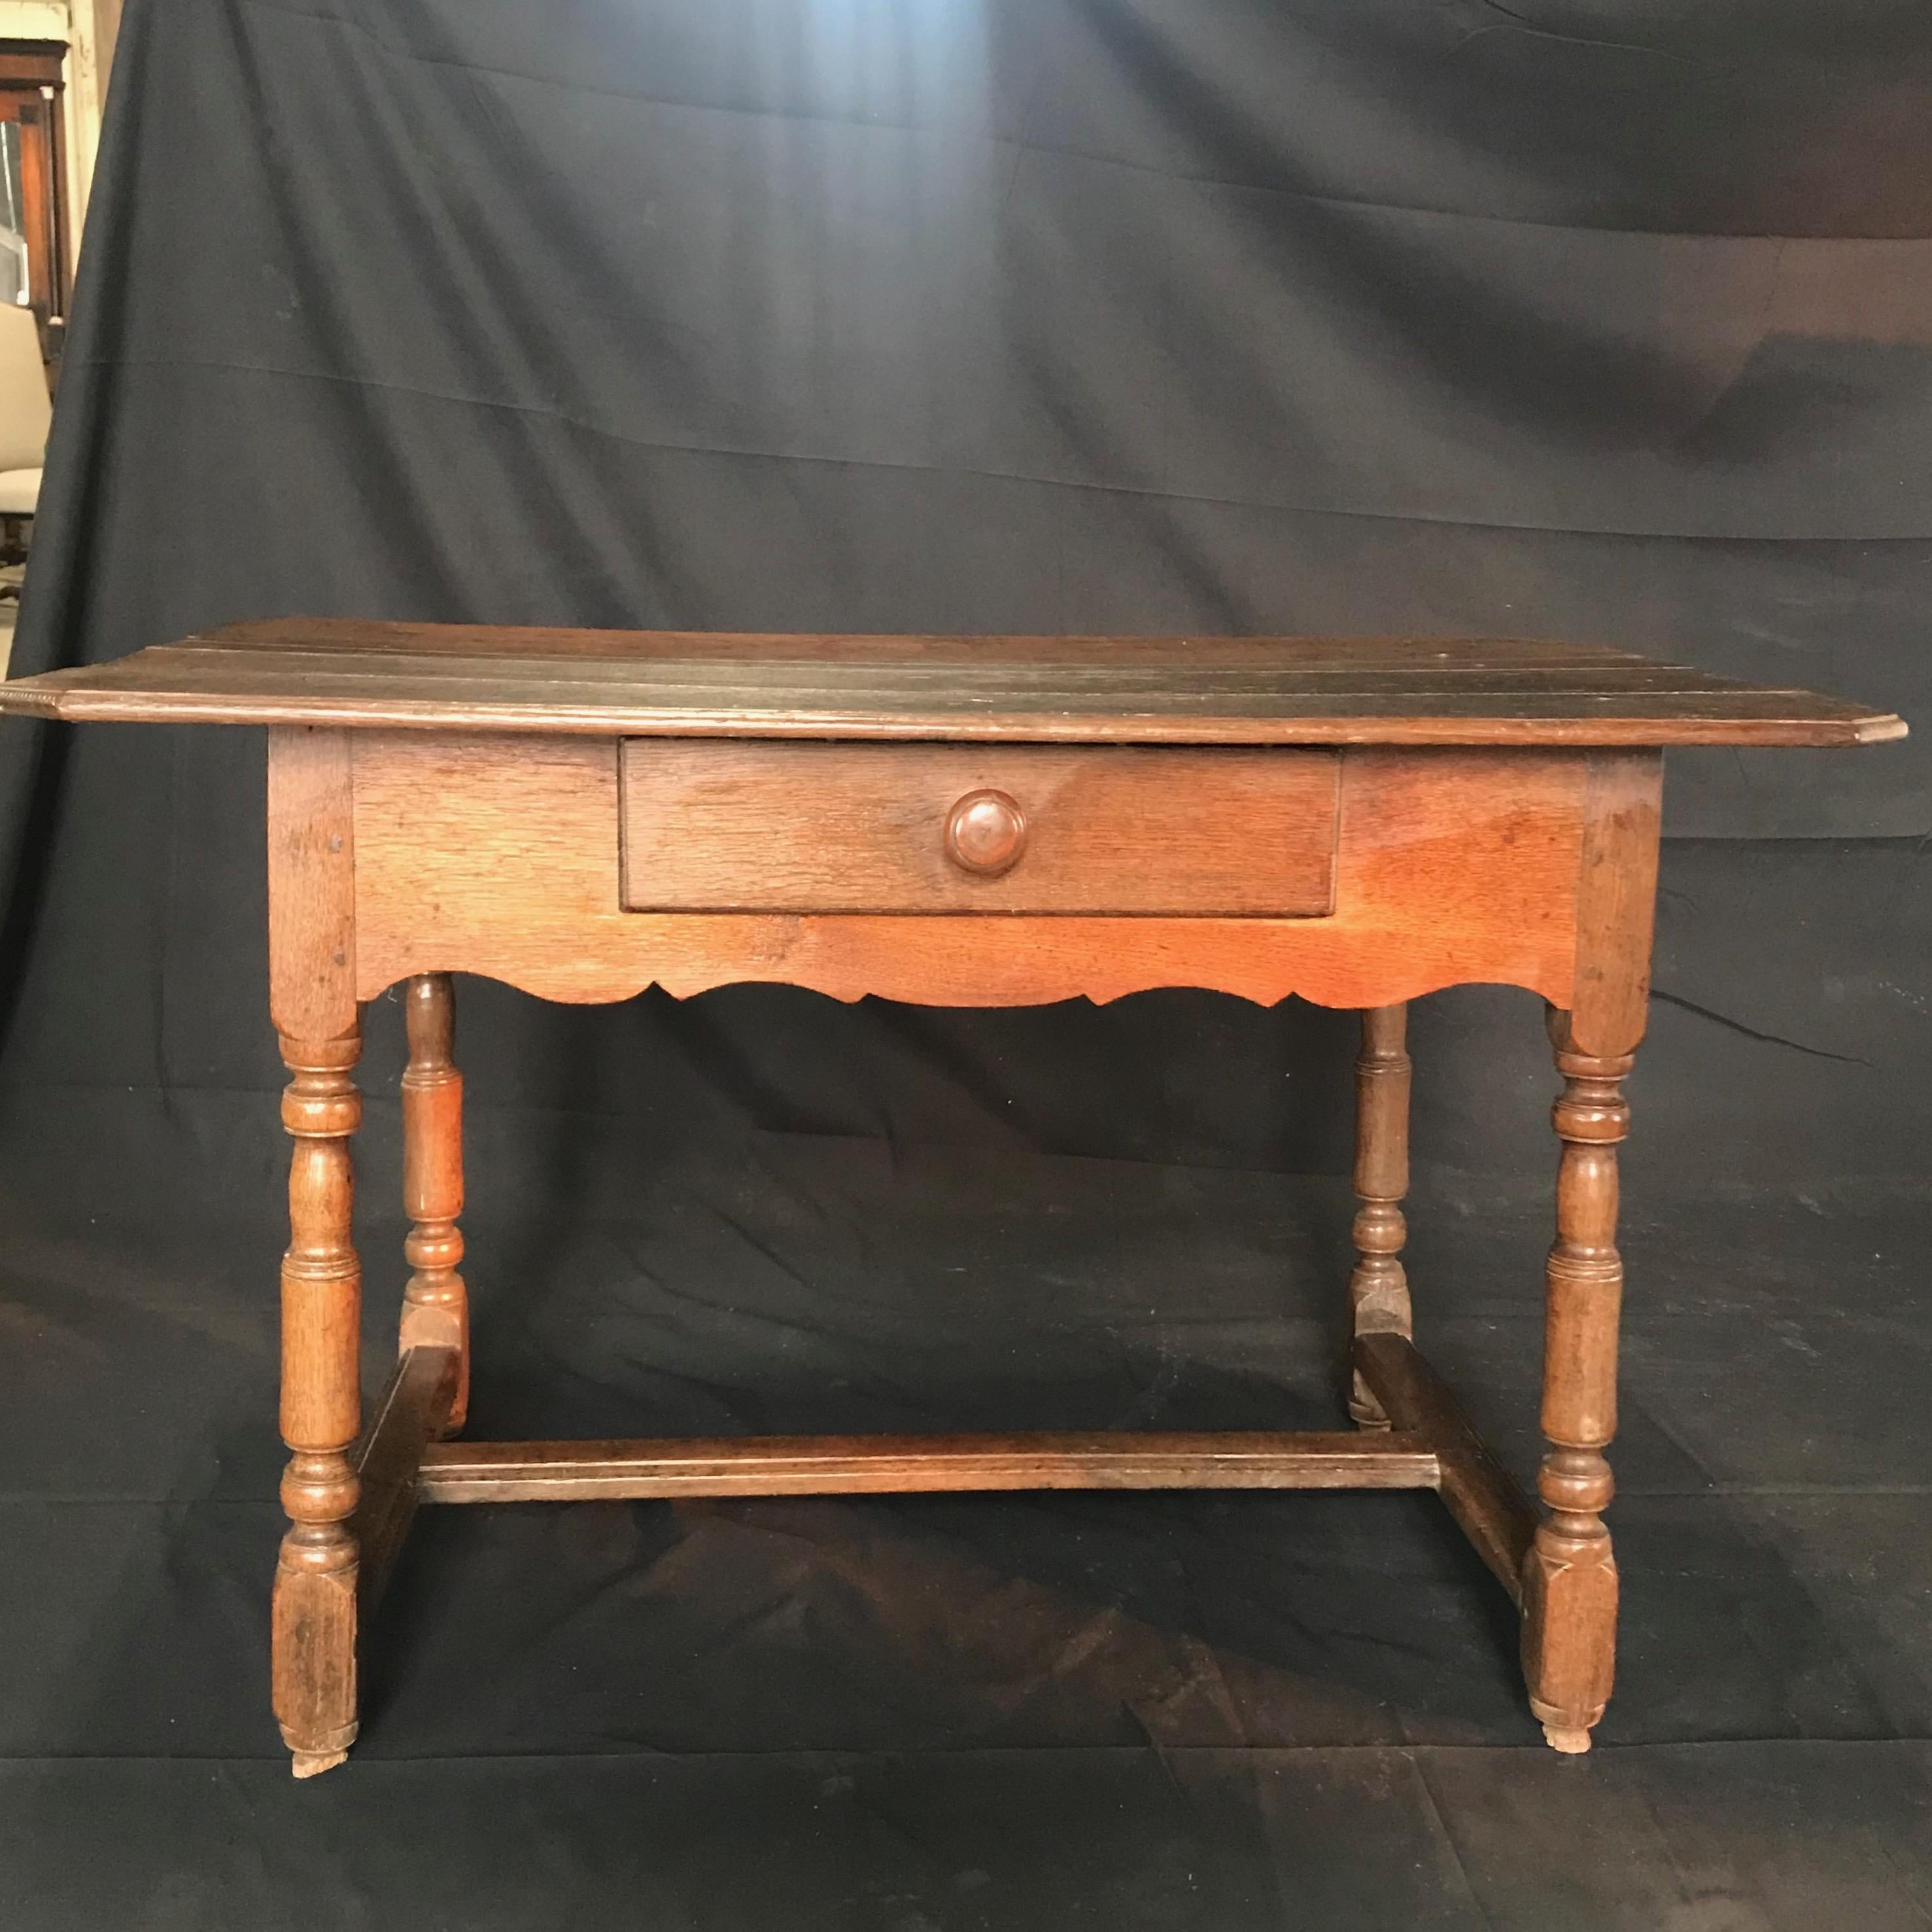 Beautiful rustic 19th century French country walnut table having wonderful patina, turned Legs and scalloped apron with one drawer. Can serve as a side table or a desk. 
#4966

 H to apron 19.25”.